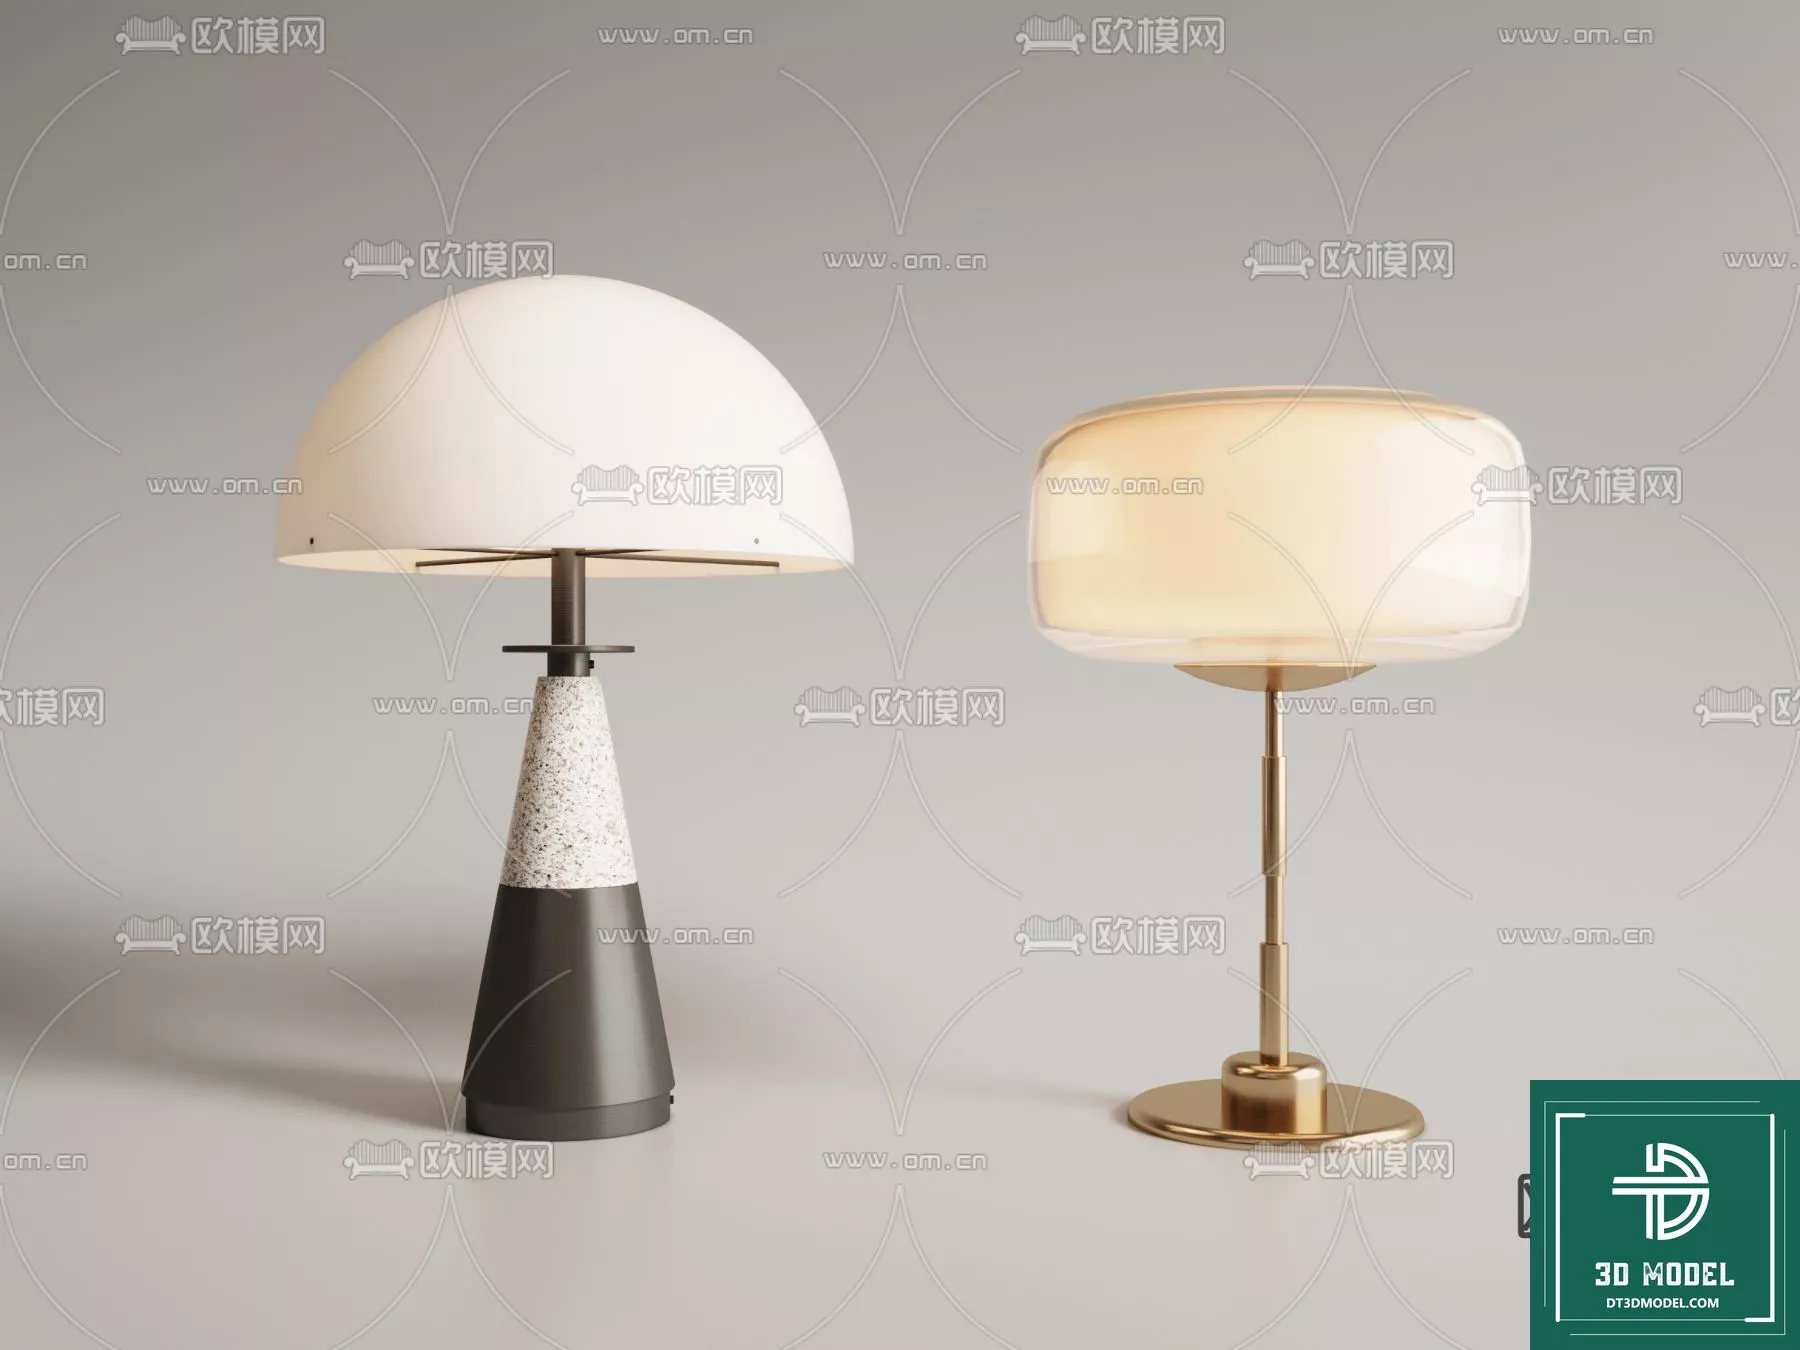 MODERN TABLE LAMP - SKETCHUP 3D MODEL - VRAY OR ENSCAPE - ID14645